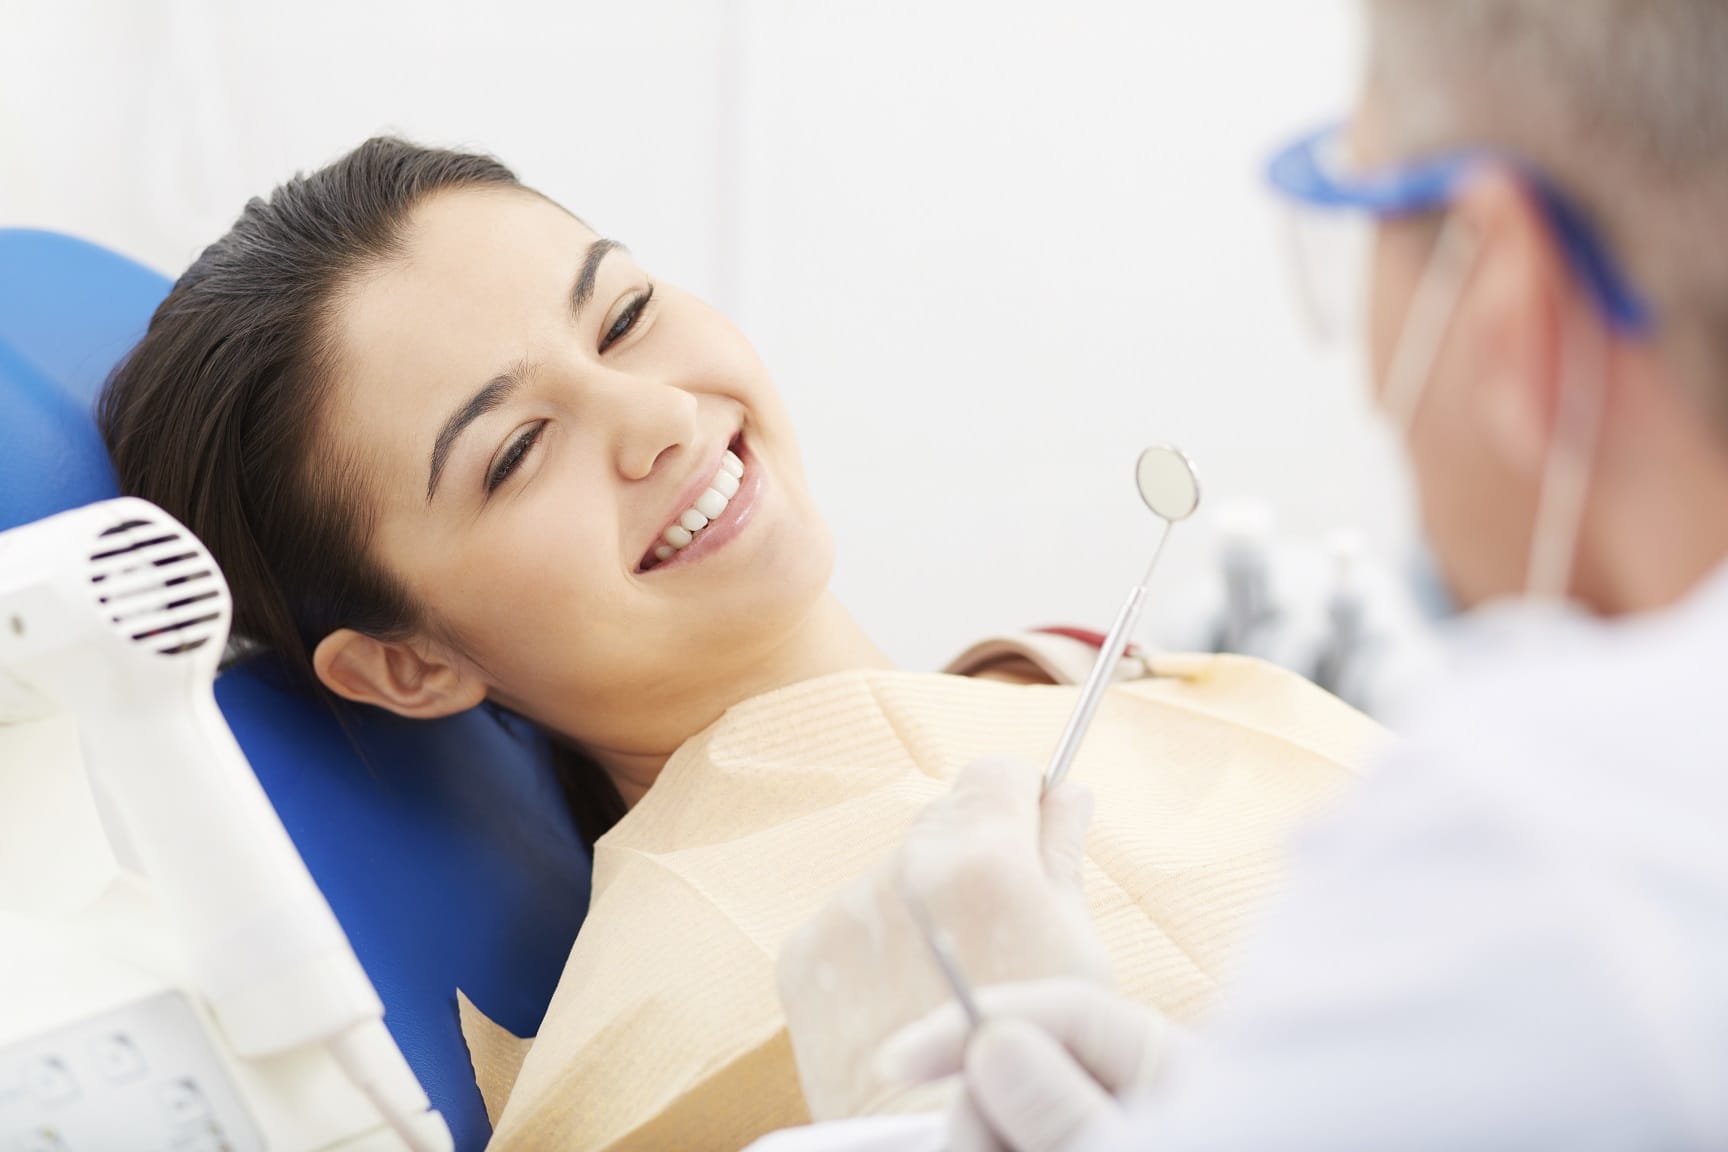 Why Dental Plans Are So Valuable